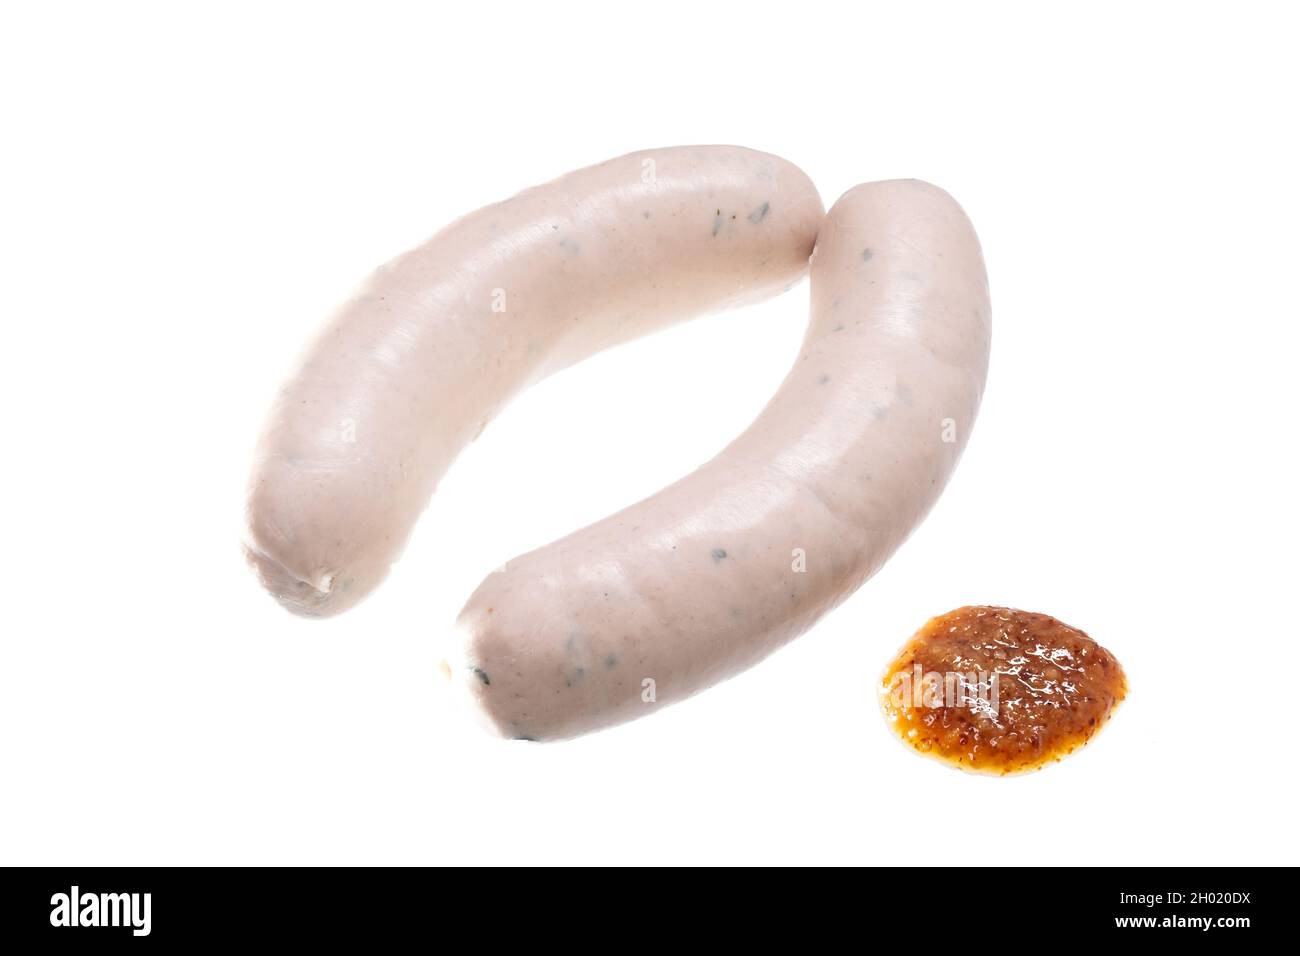 Bavarian veal sausages with mustard isolated on a white background Stock Photo